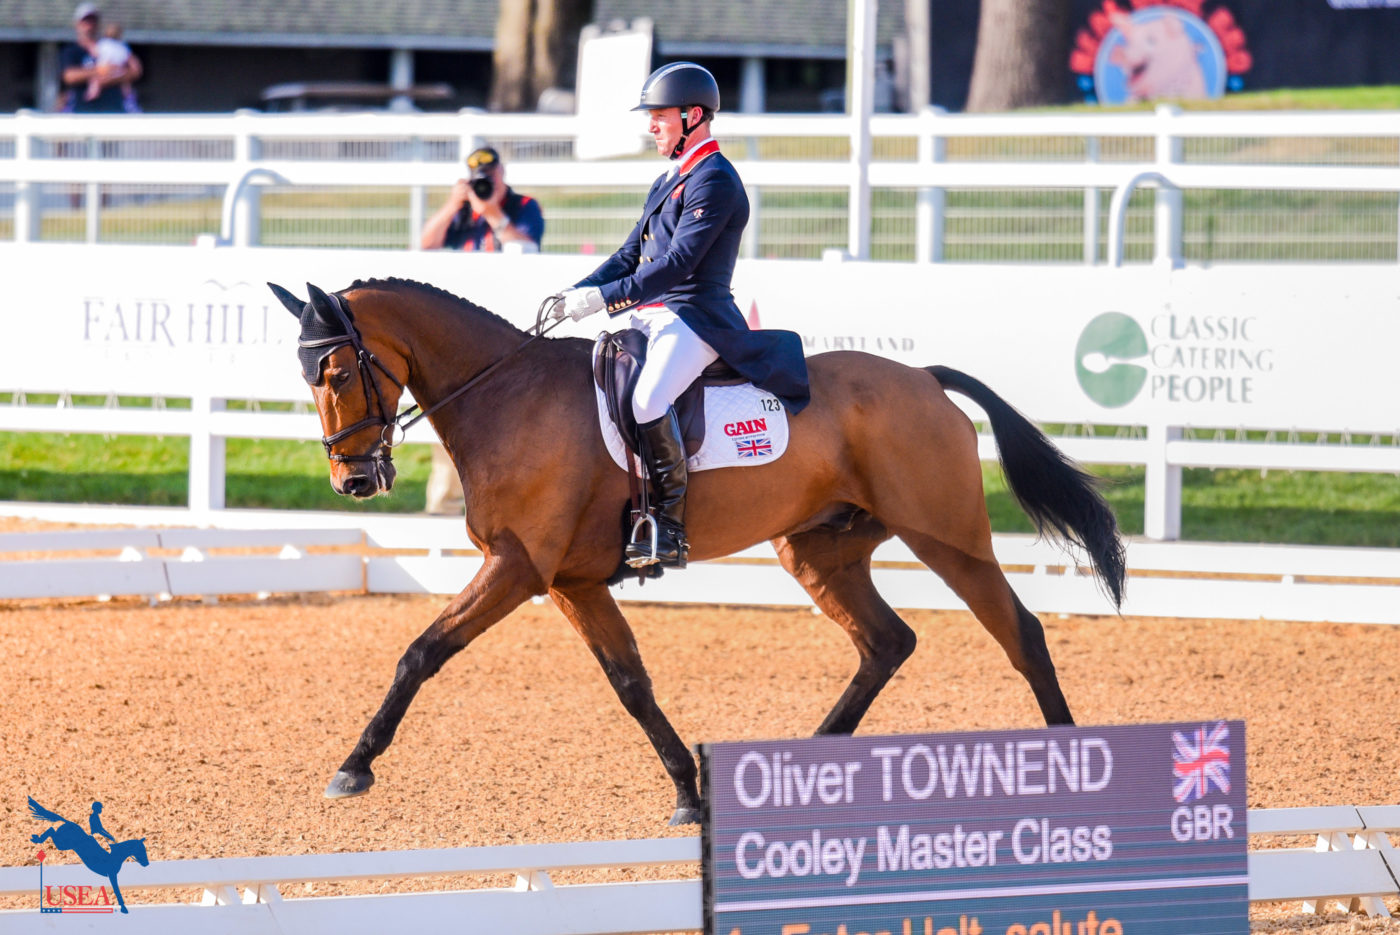 1st - Oliver Townend and Cooley Master Class